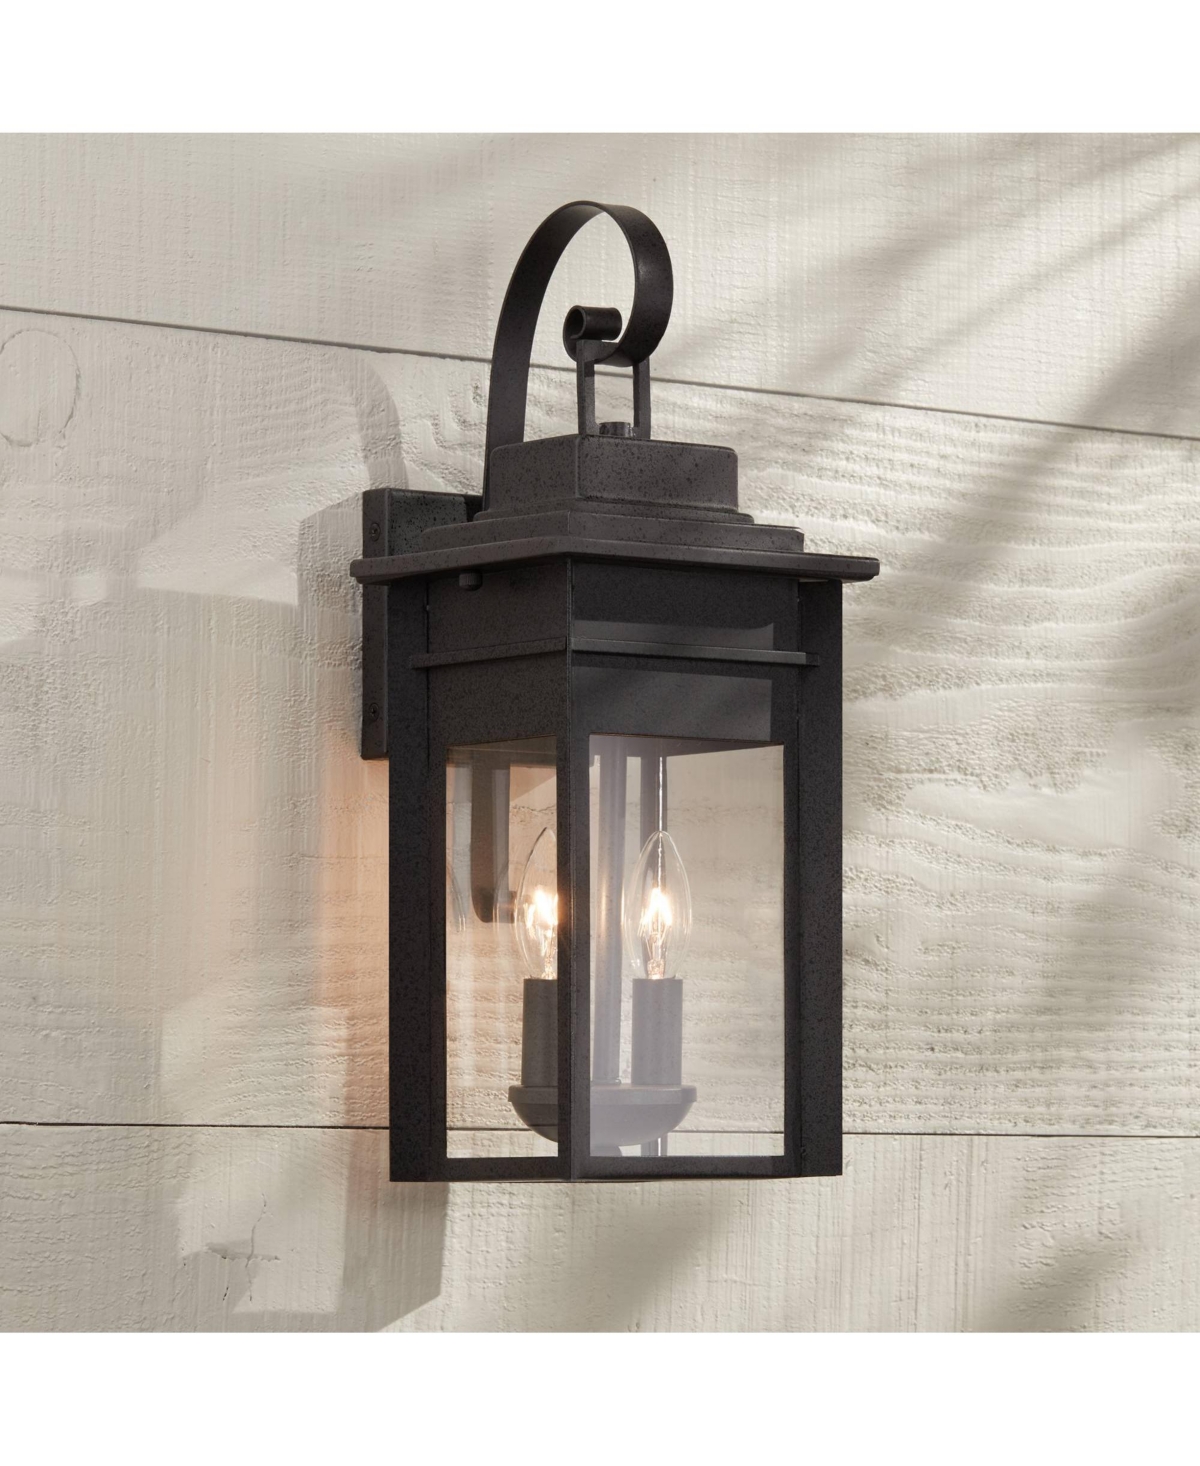 Bransford Traditional Rustic Outdoor Wall Light Fixture Lantern Black Specked Gray 17" Clear Glass Panels for Exterior House Porch Patio Outside Deck